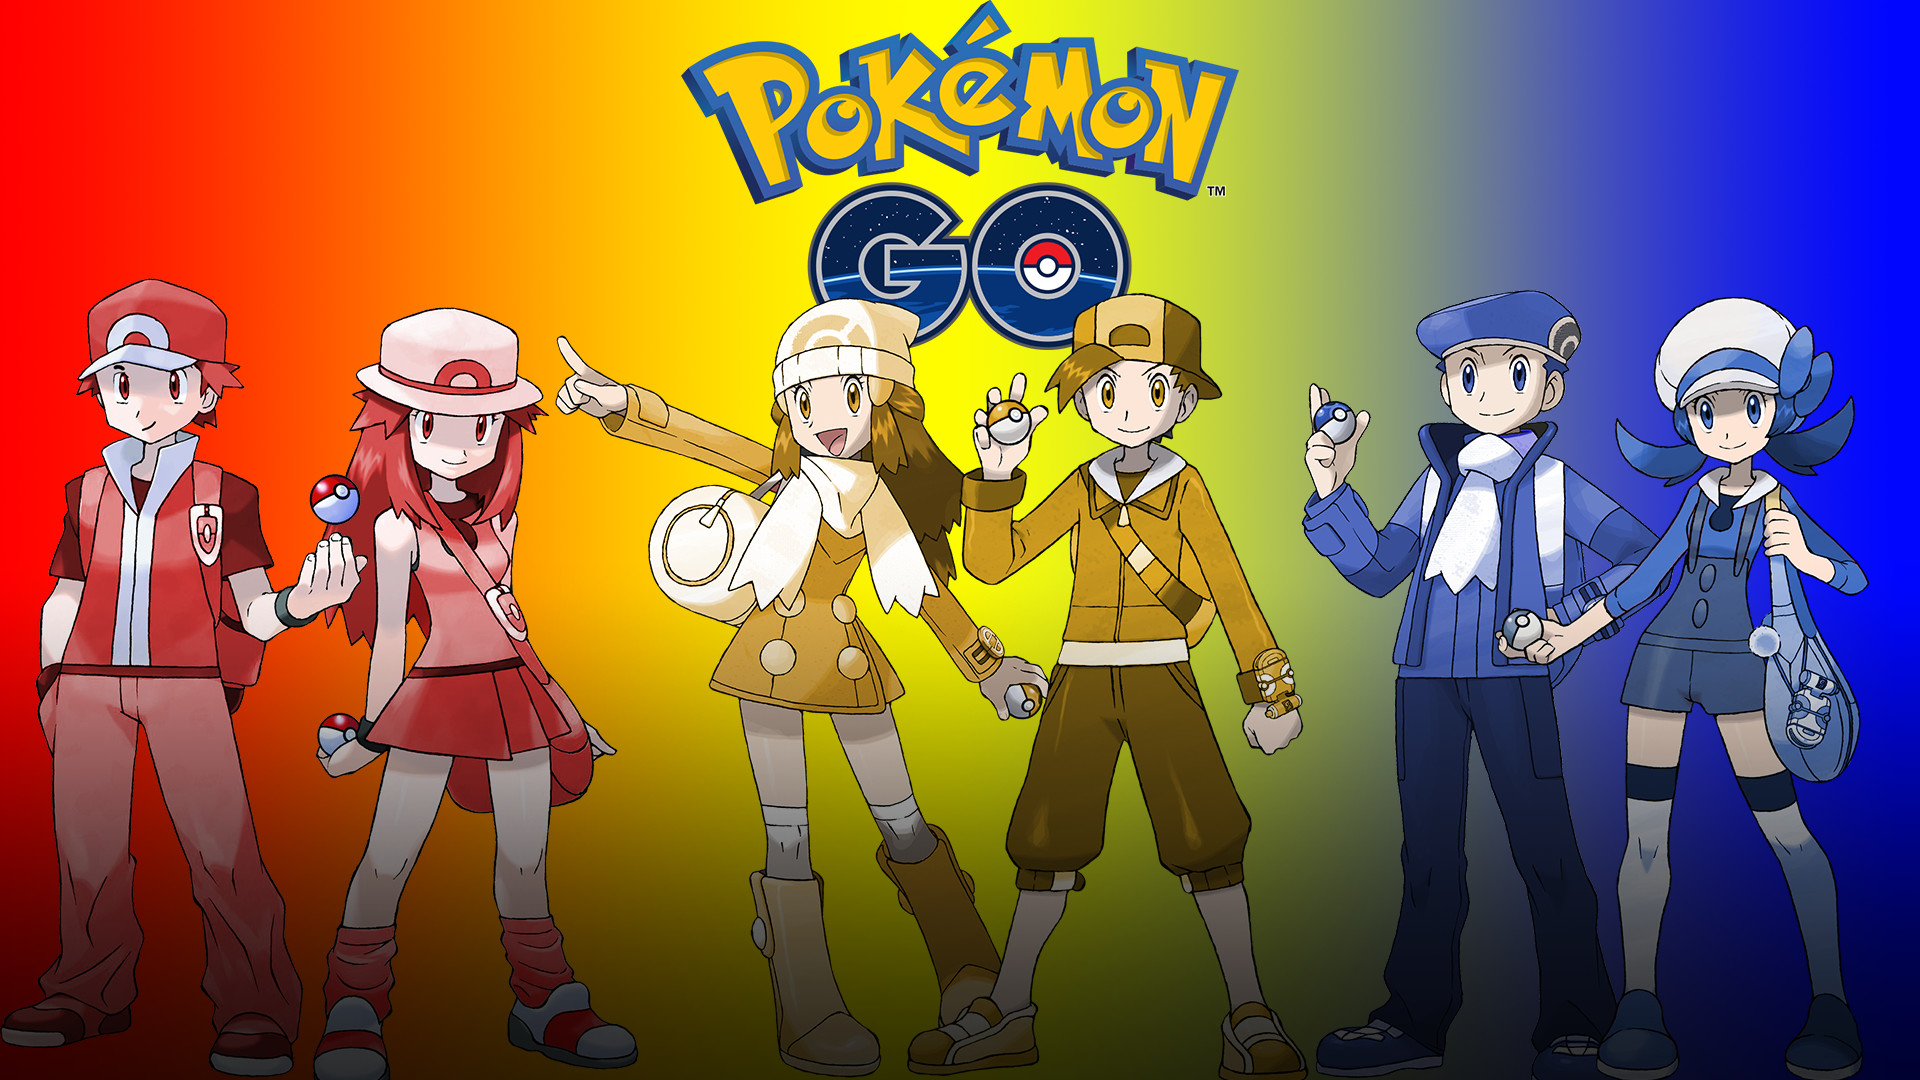 1920x1080 I made a desktop wallpaper for pokemon go! So here's a little present for  your computer as we venture towards july :D ...